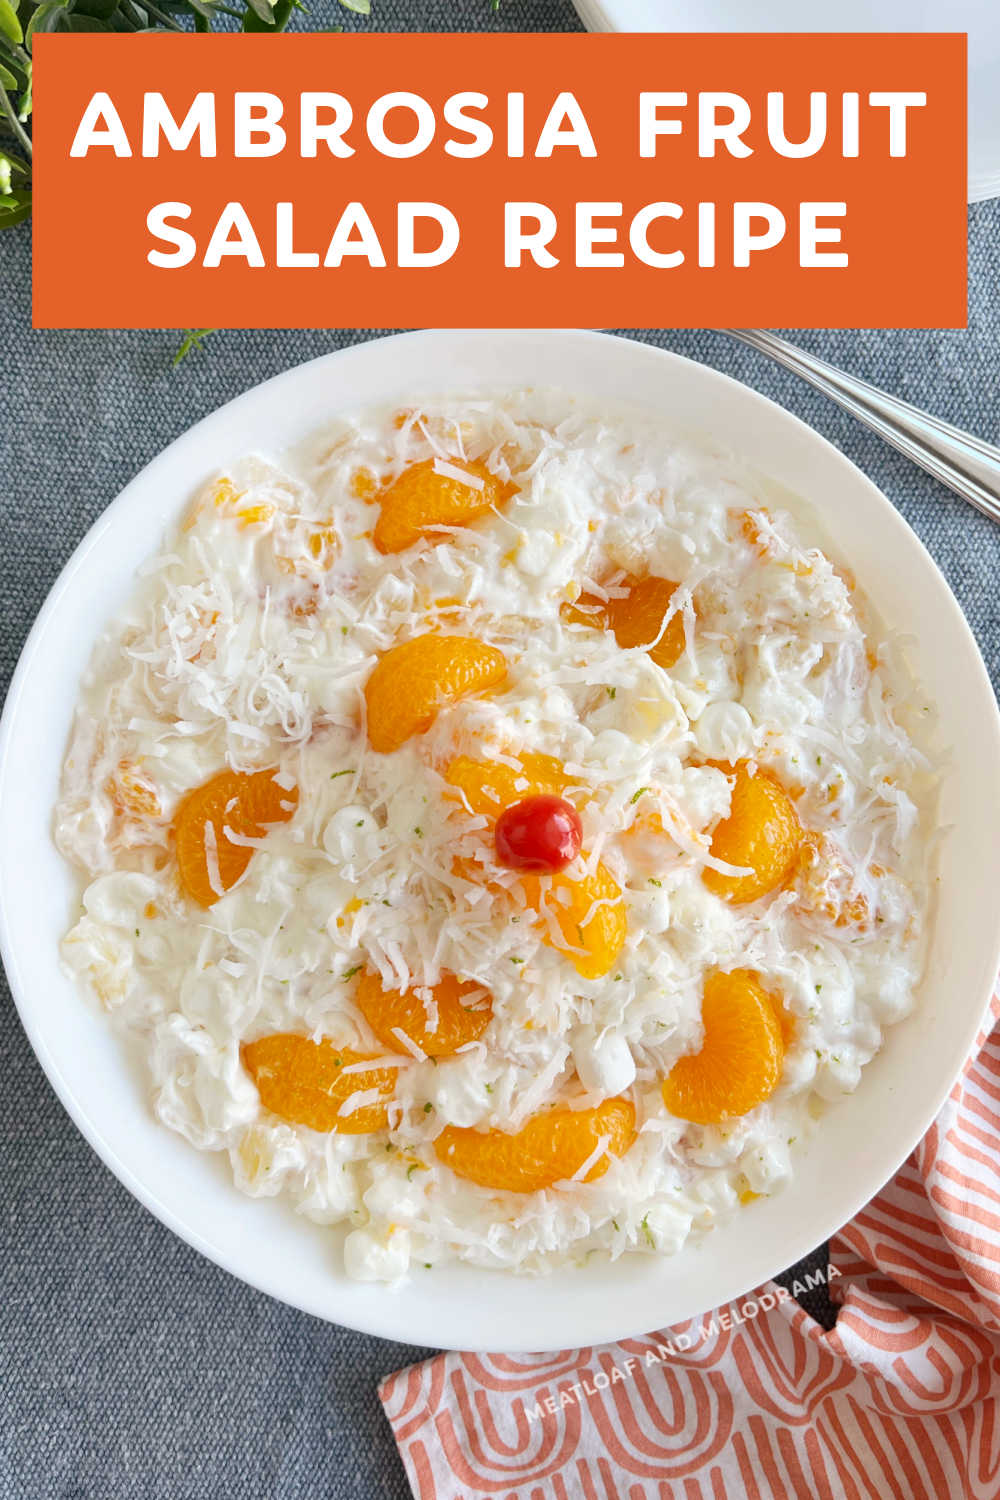 Ambrosia Fruit Salad recipe with sour cream, pineapple, mandarin oranges, mini marshmallows and coconut is a classic dessert salad. This creamy fruit salad is perfect for family dinners and special occasions! via @meamel